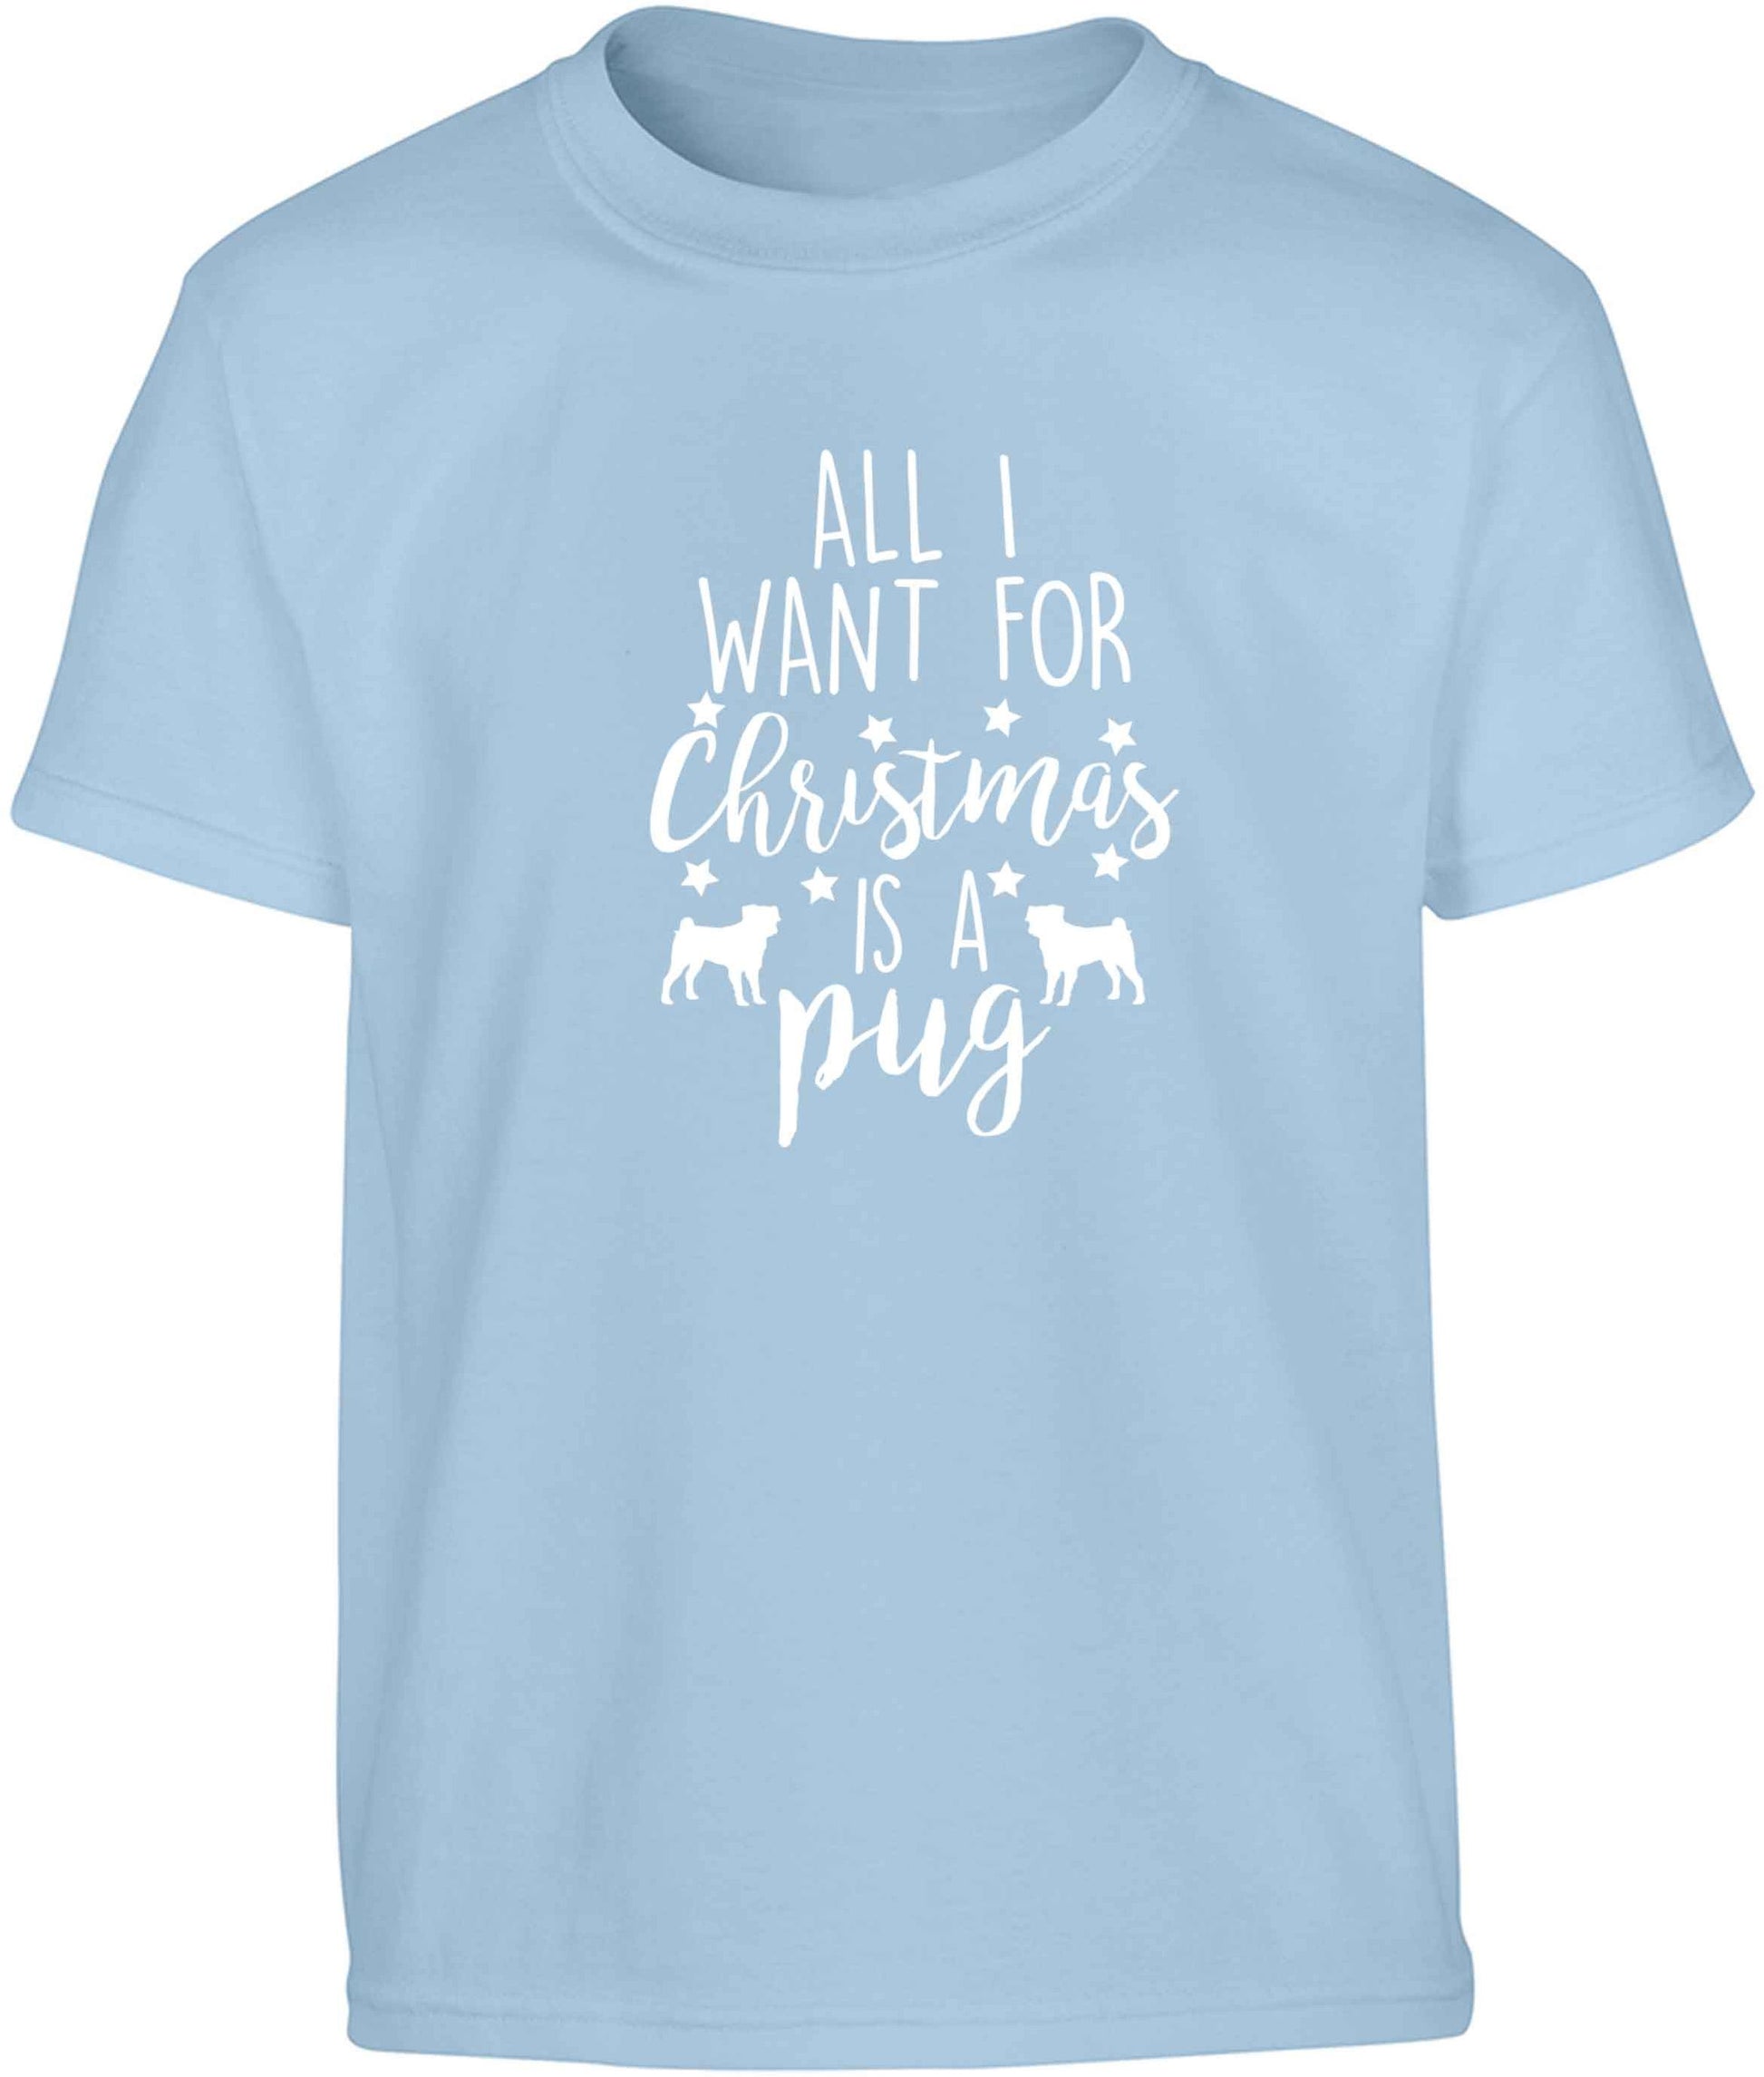 All I want for Christmas is a pug Children's light blue Tshirt 12-13 Years